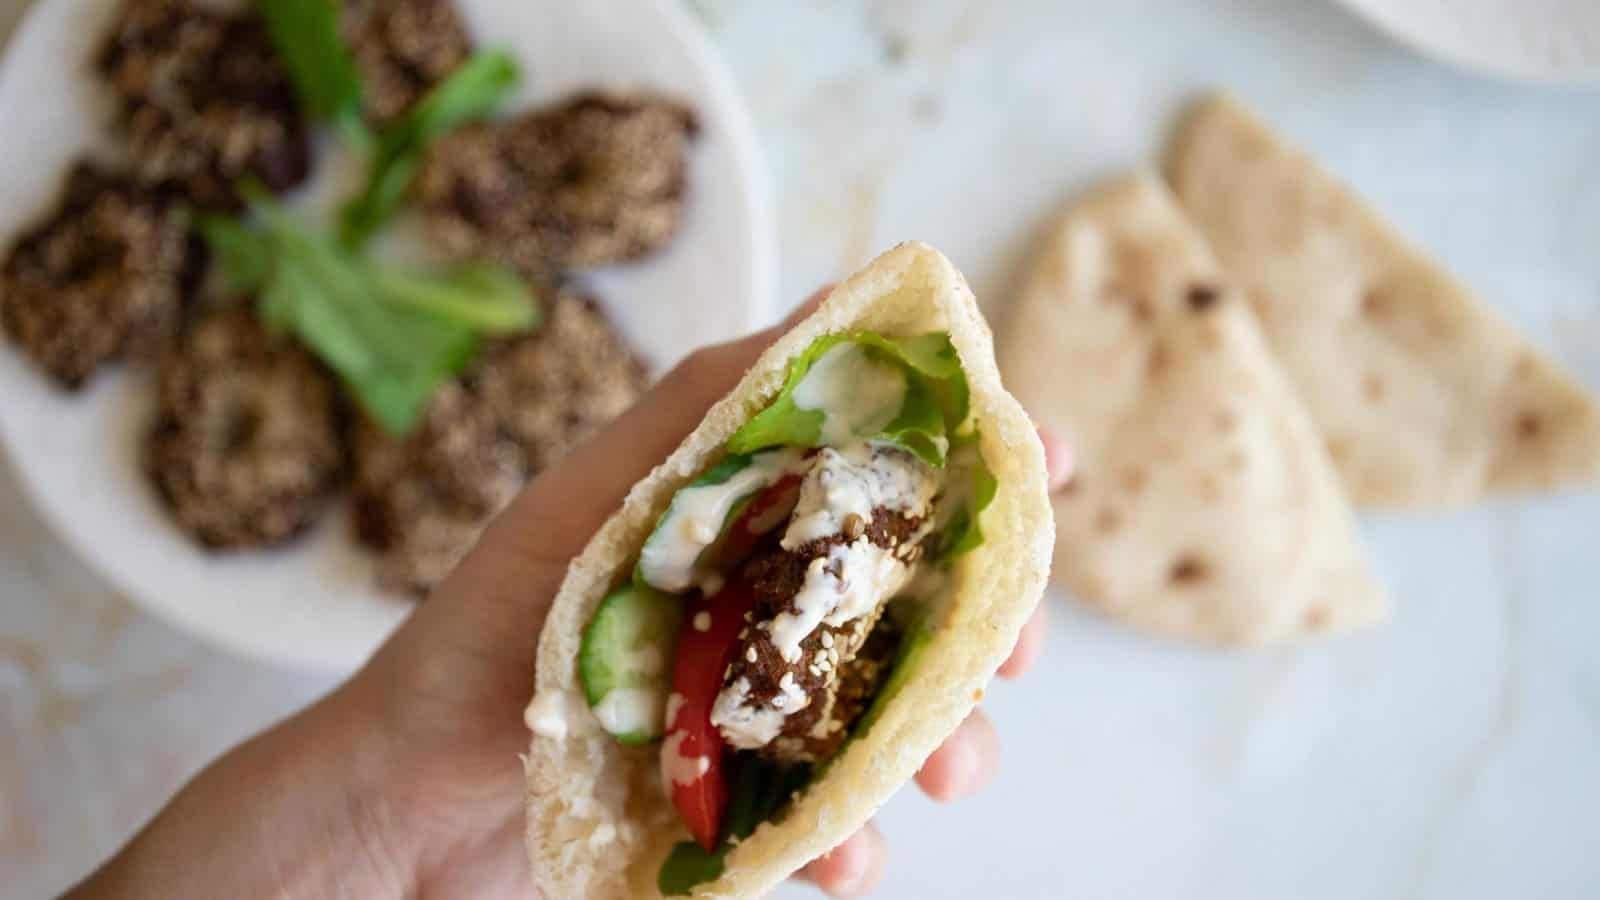 Cook delicious falafel at home with this easy-peasy recipe